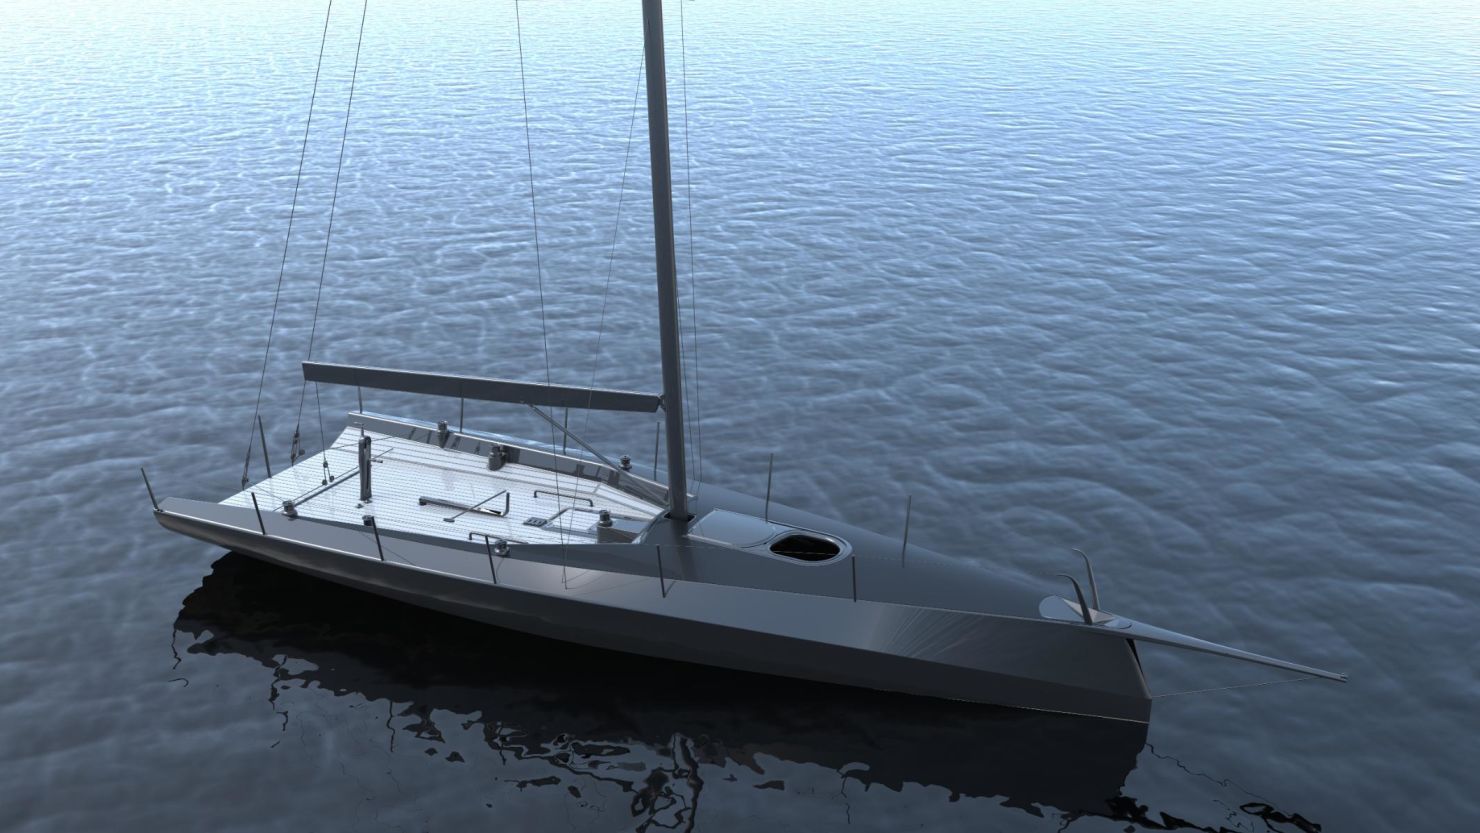 Niklas Zennstrom's new Ran racing yacht features a revolutionary electric motor. 